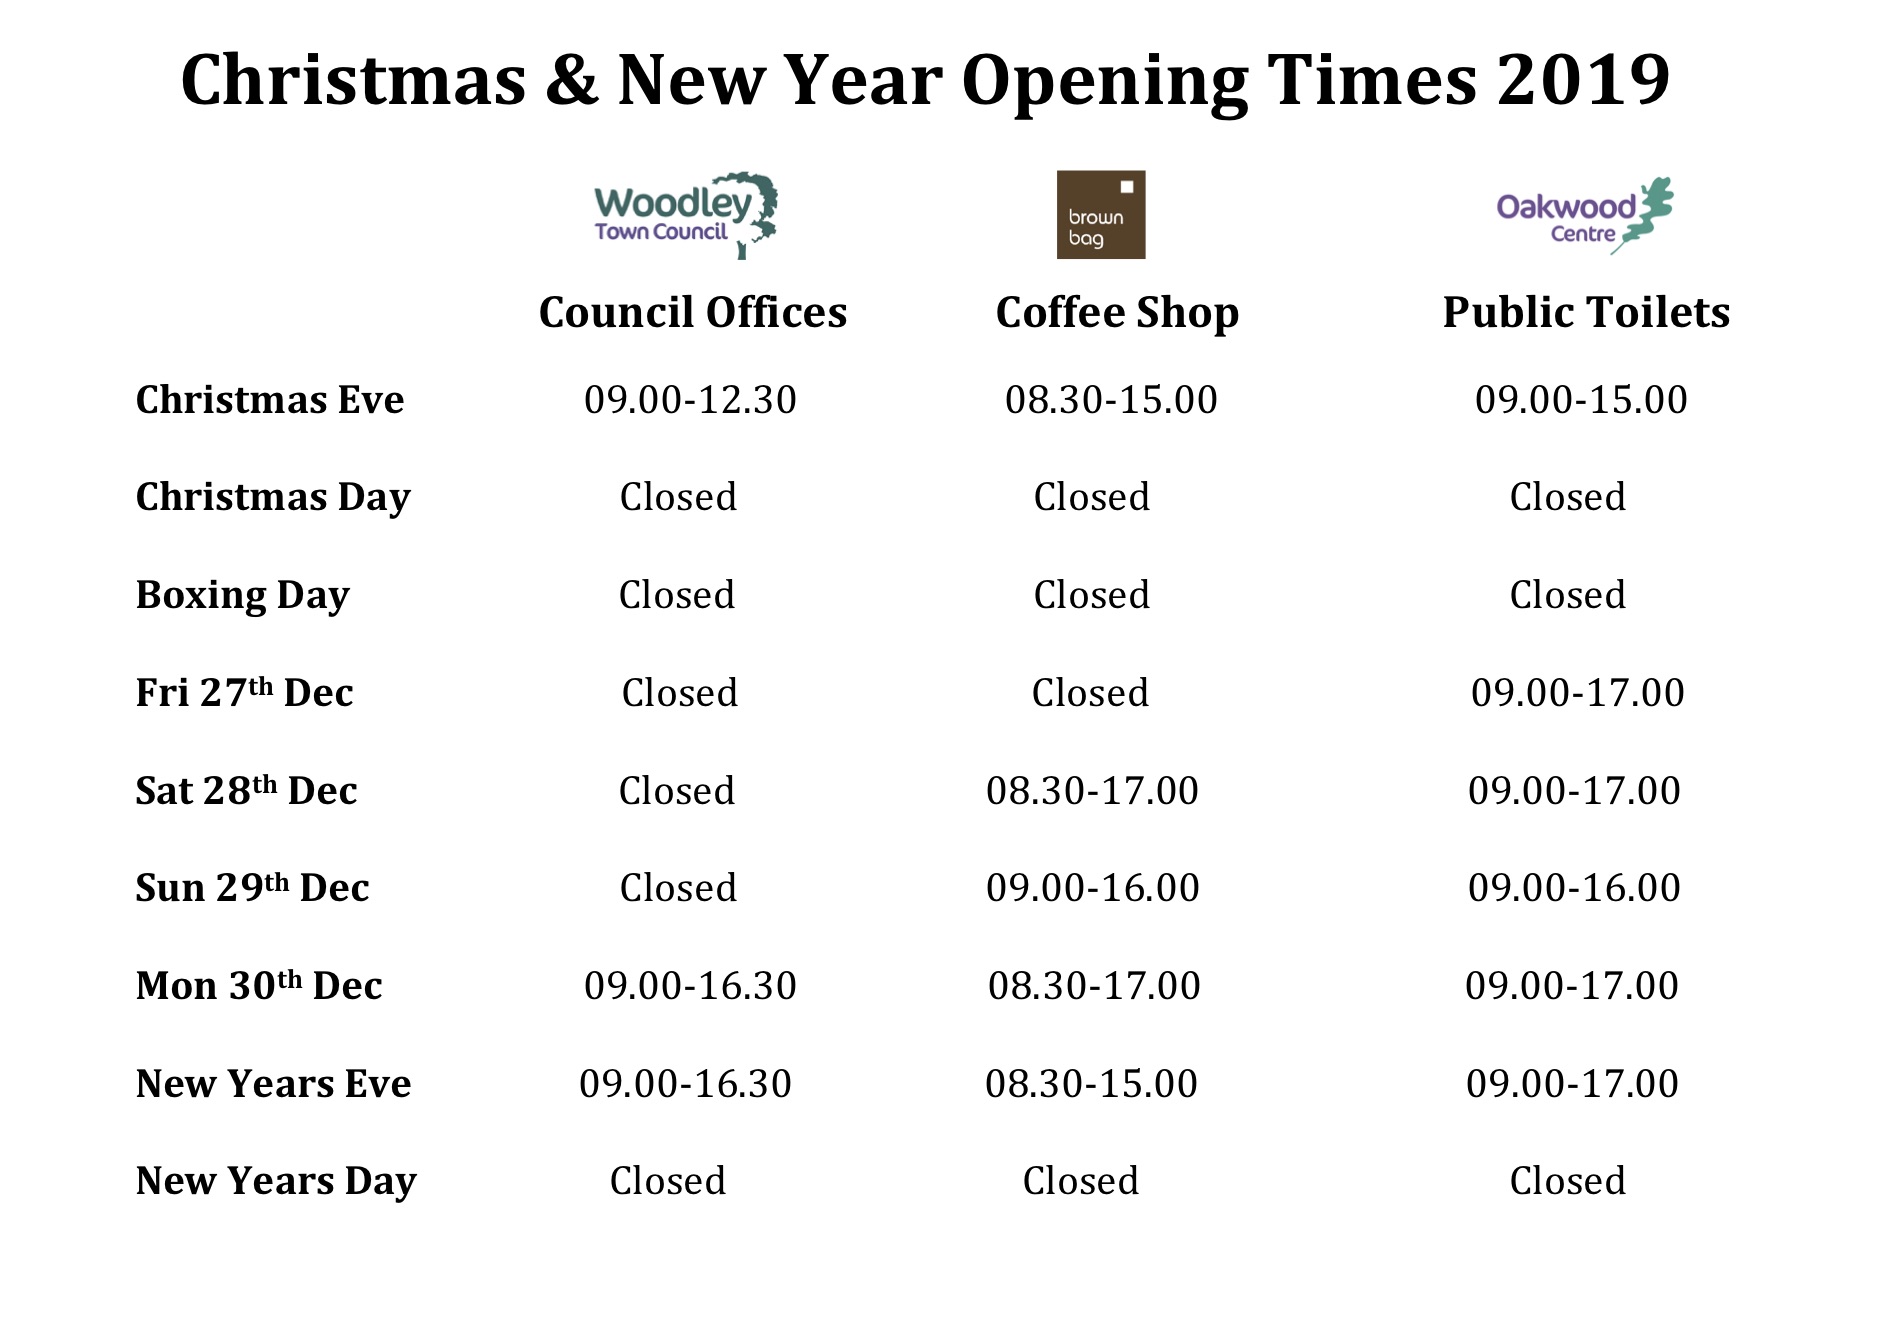 Woodley Town Council Christmas opening hours